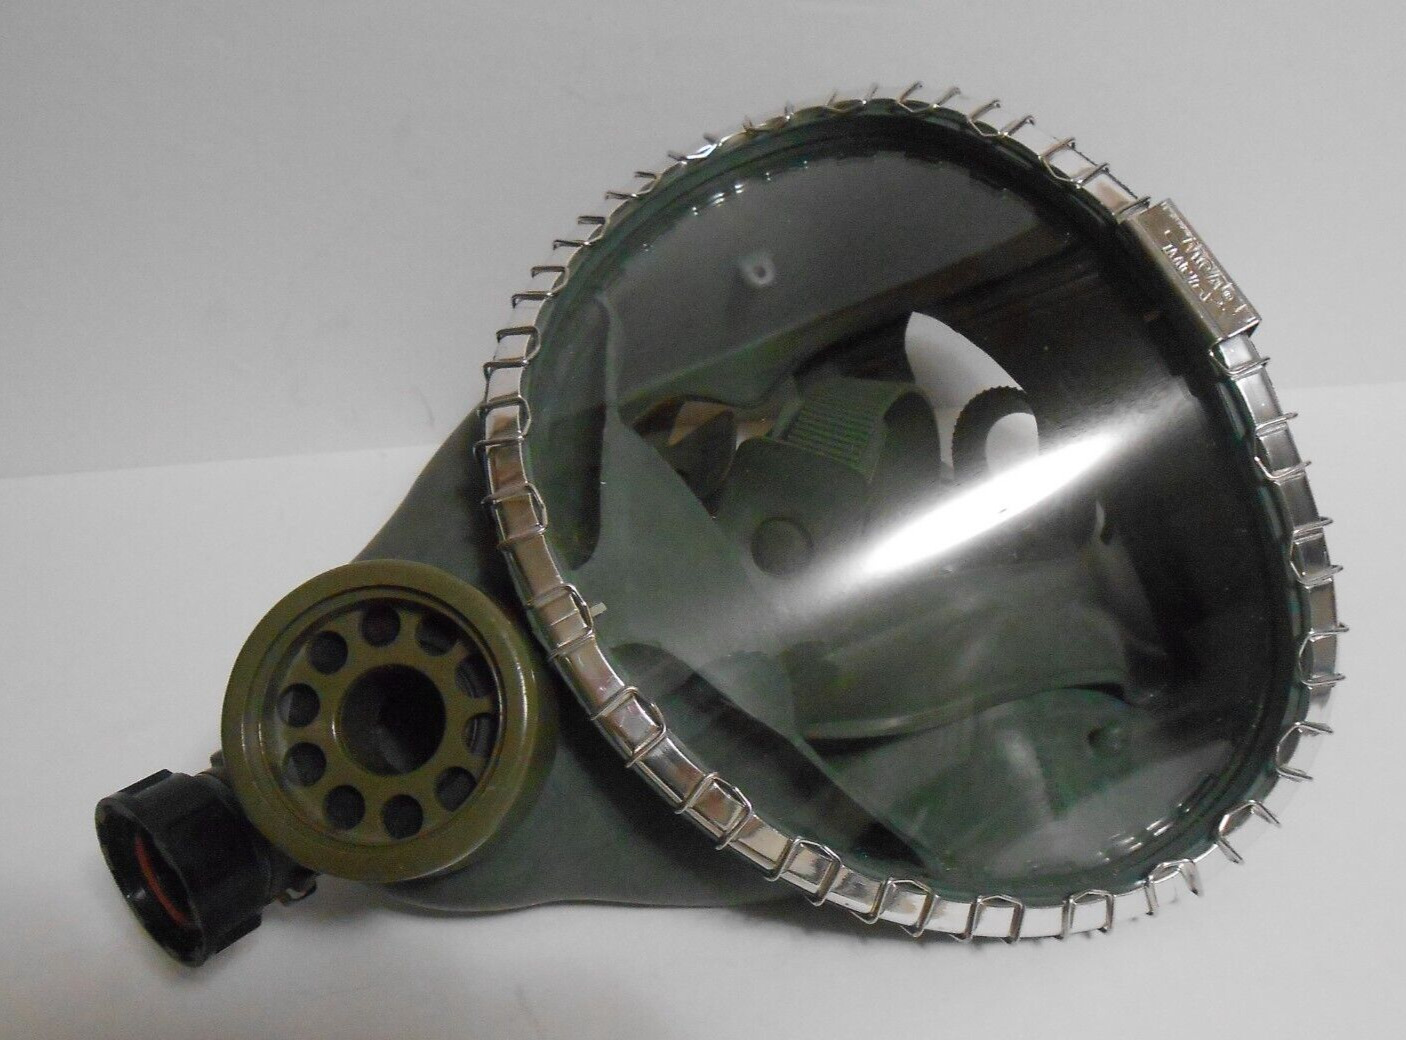 Vintage MSA Green Rubber Gas Mask ClearVue Mine Safety Military Respirator